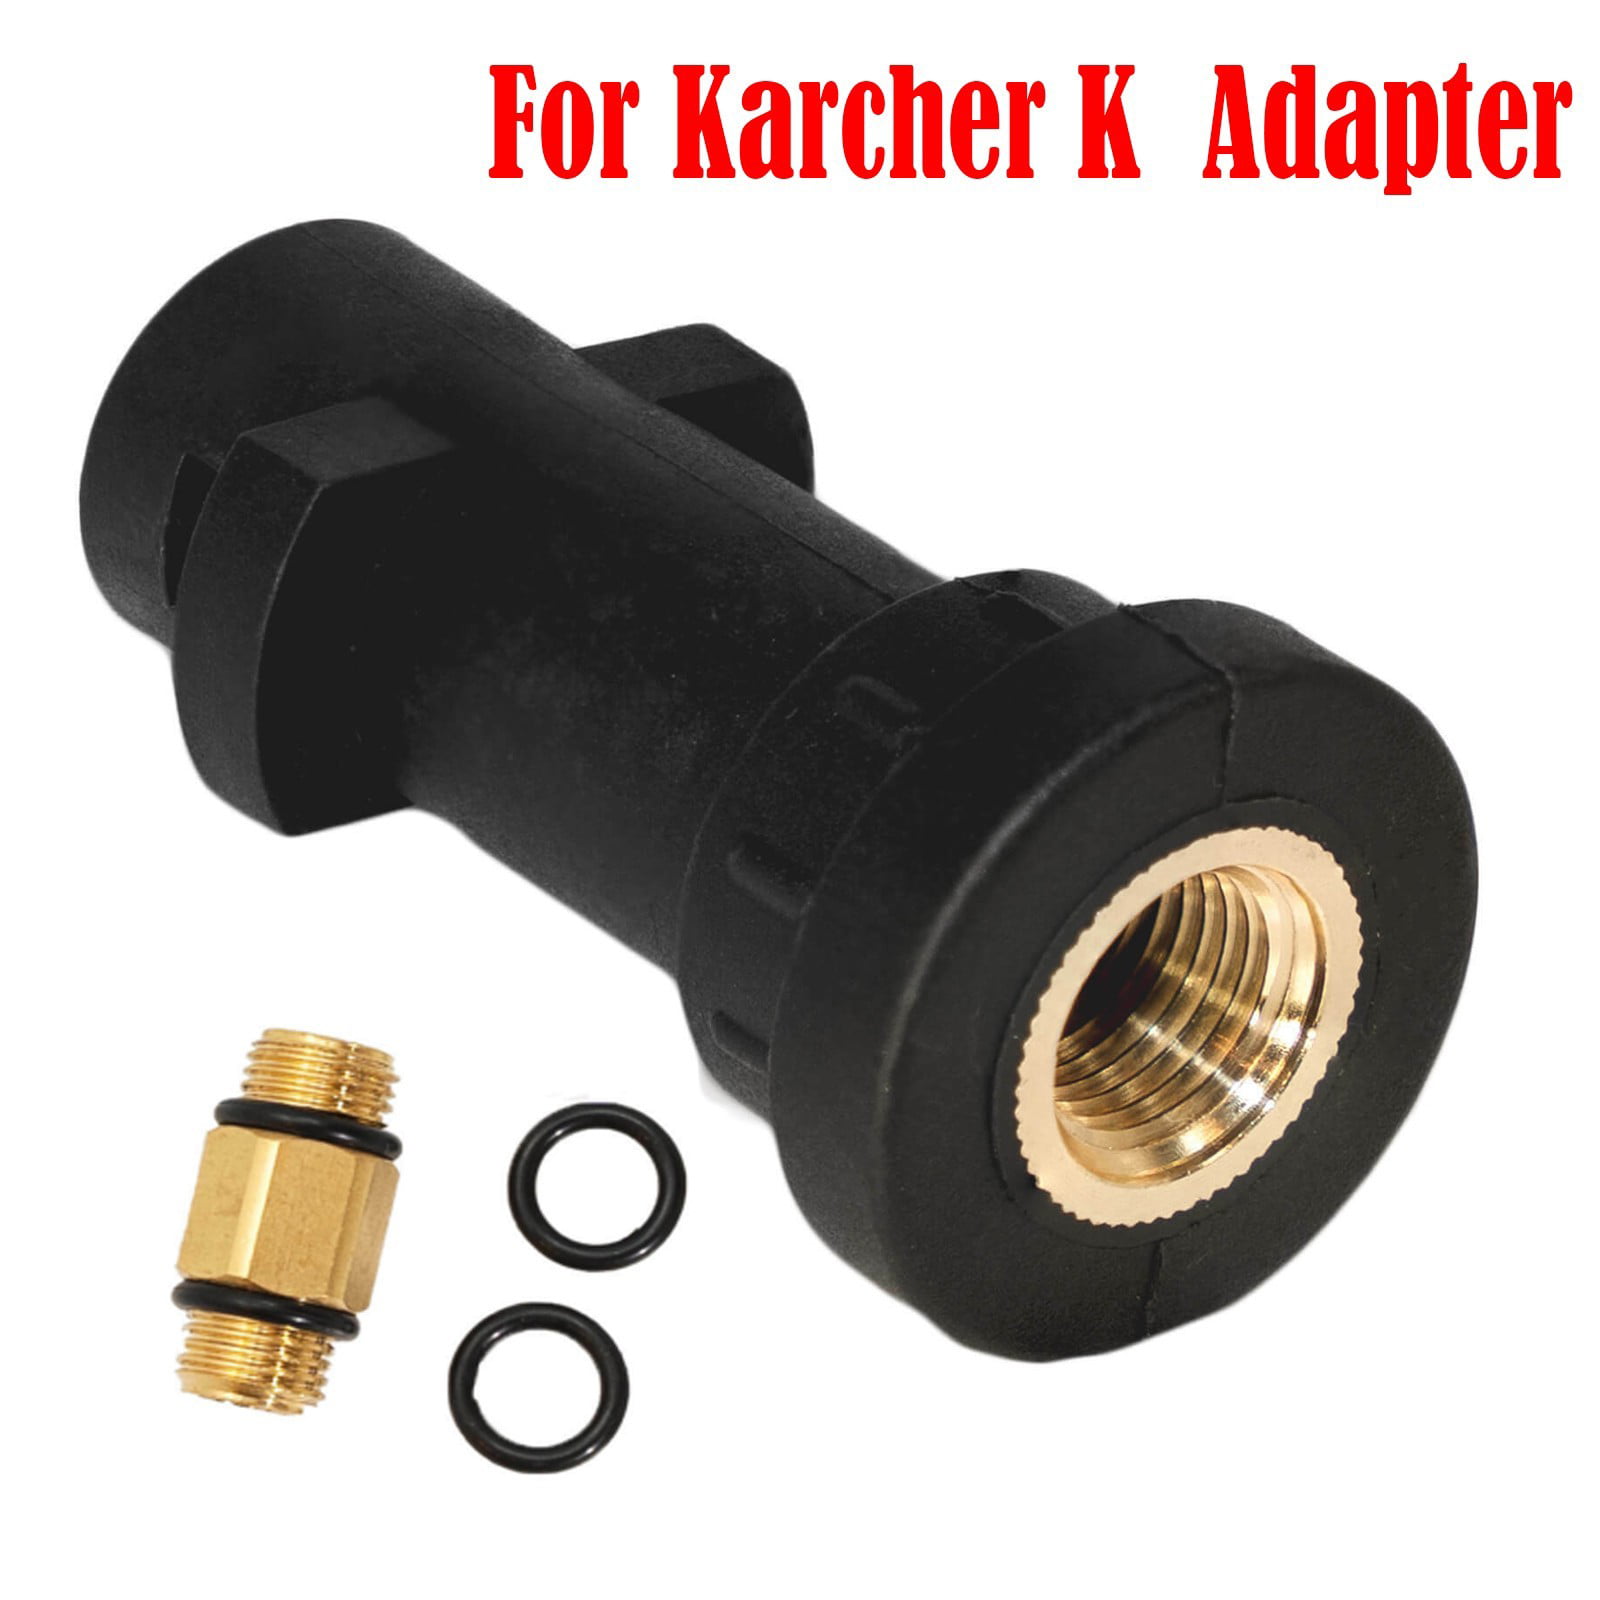 Karcher K Adapter Show Foam Lance Bayonet Fitting Pressure Washer Connection 